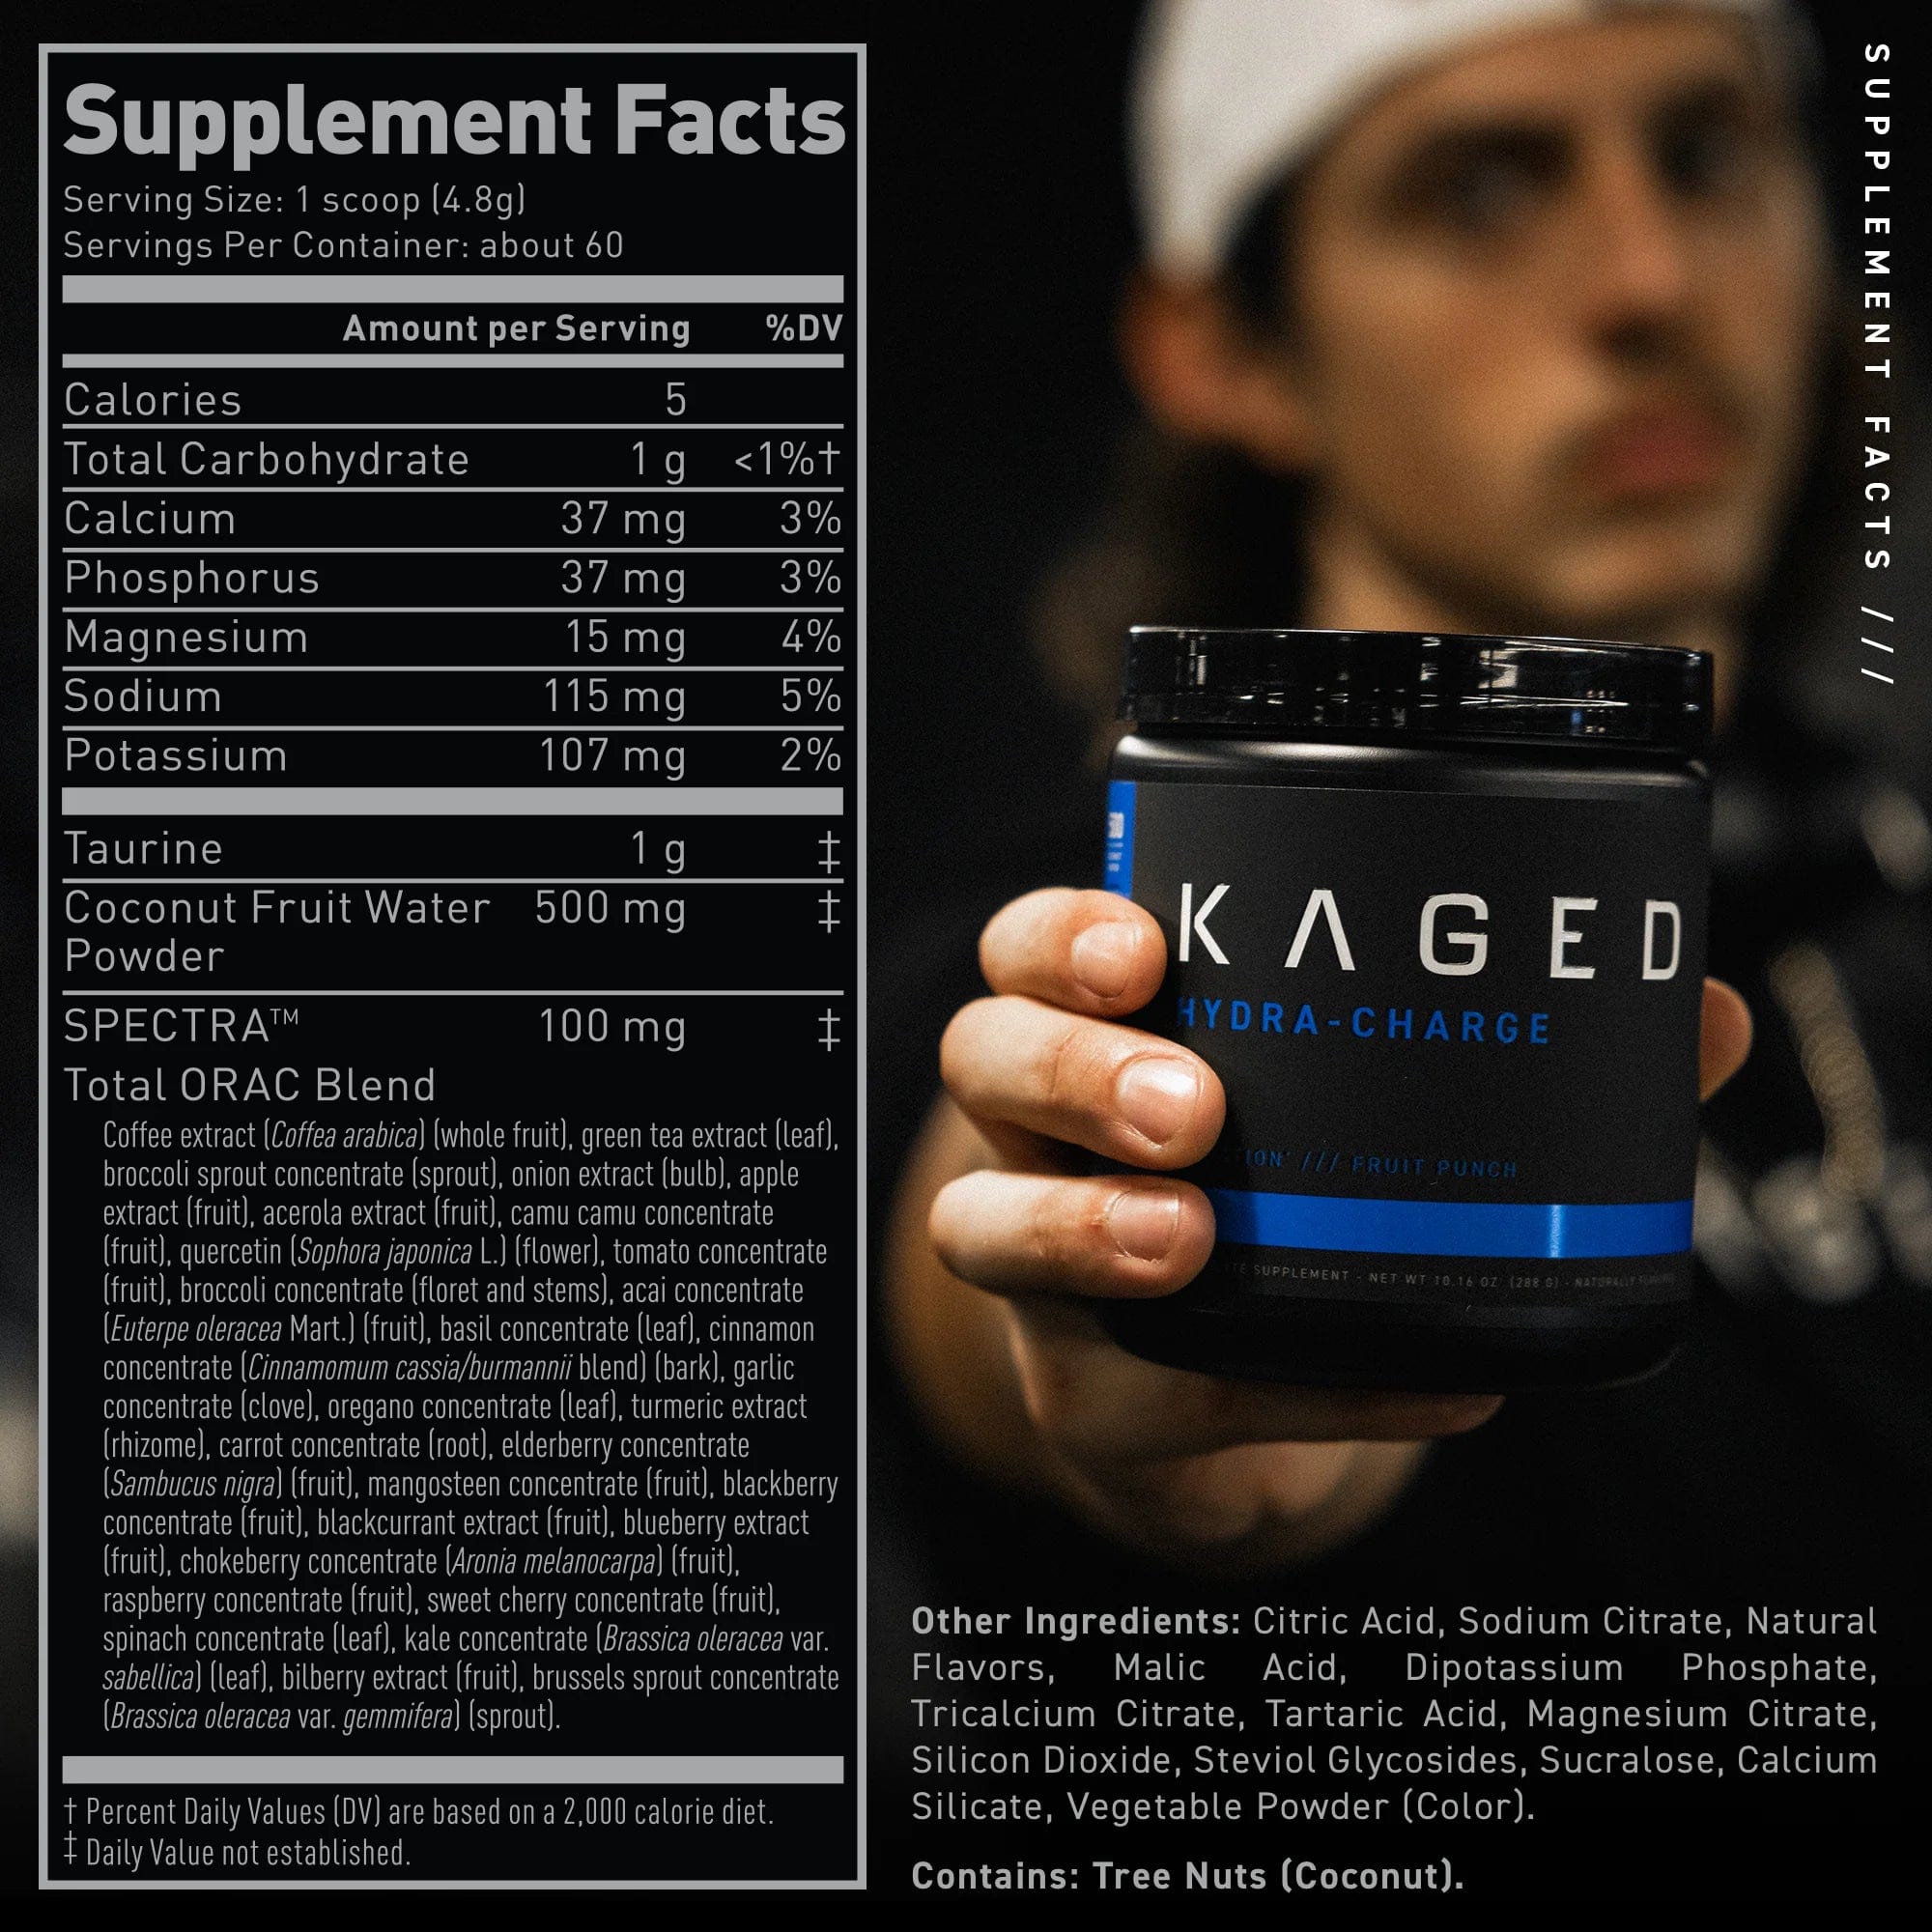 Kaged MuscleHydra-ChargeDaily Electrolyte DrinkRED SUPPS